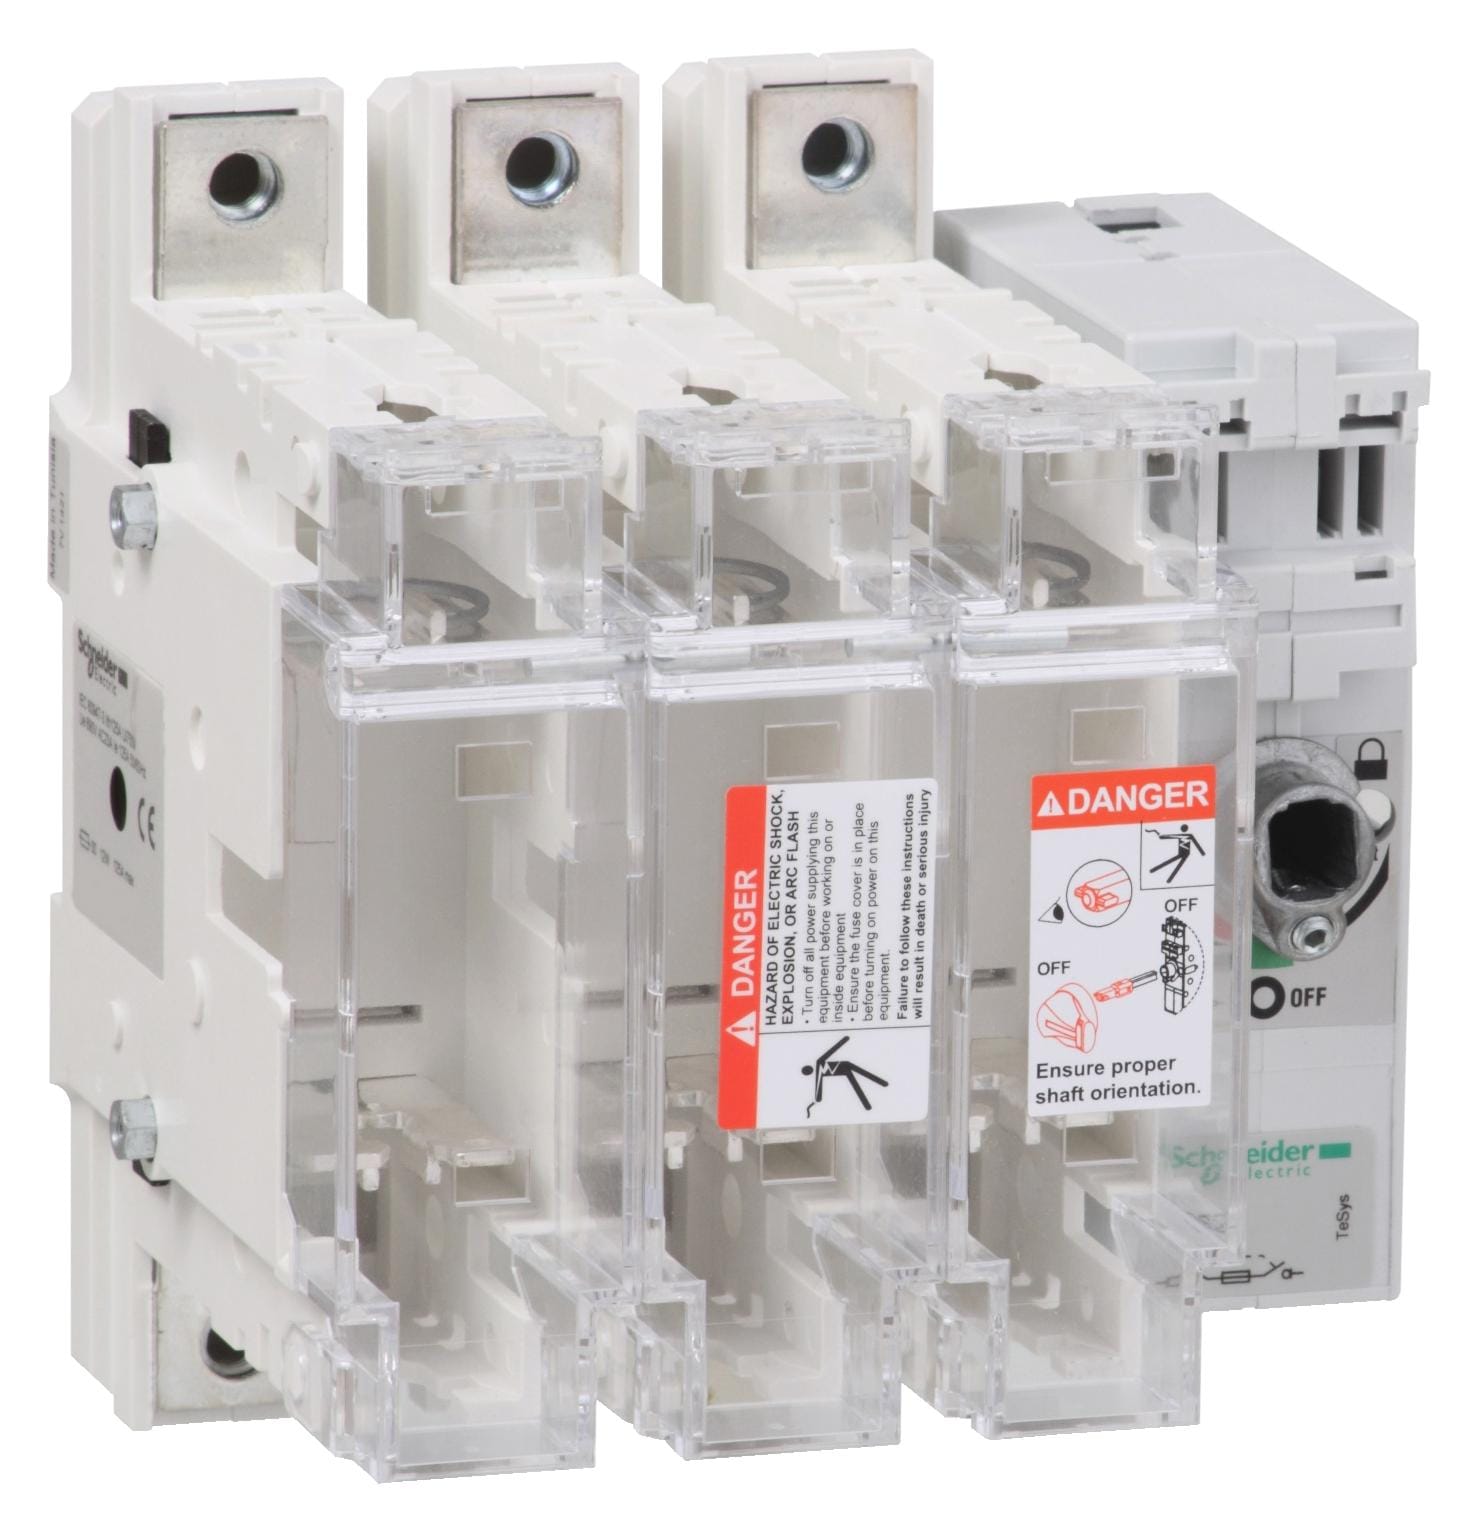 SCHNEIDER ELECTRIC Fused GS2QQ3 FUSE DISCONNECT SW. 3X 400A 2 SCHNEIDER ELECTRIC 3406293 GS2QQ3